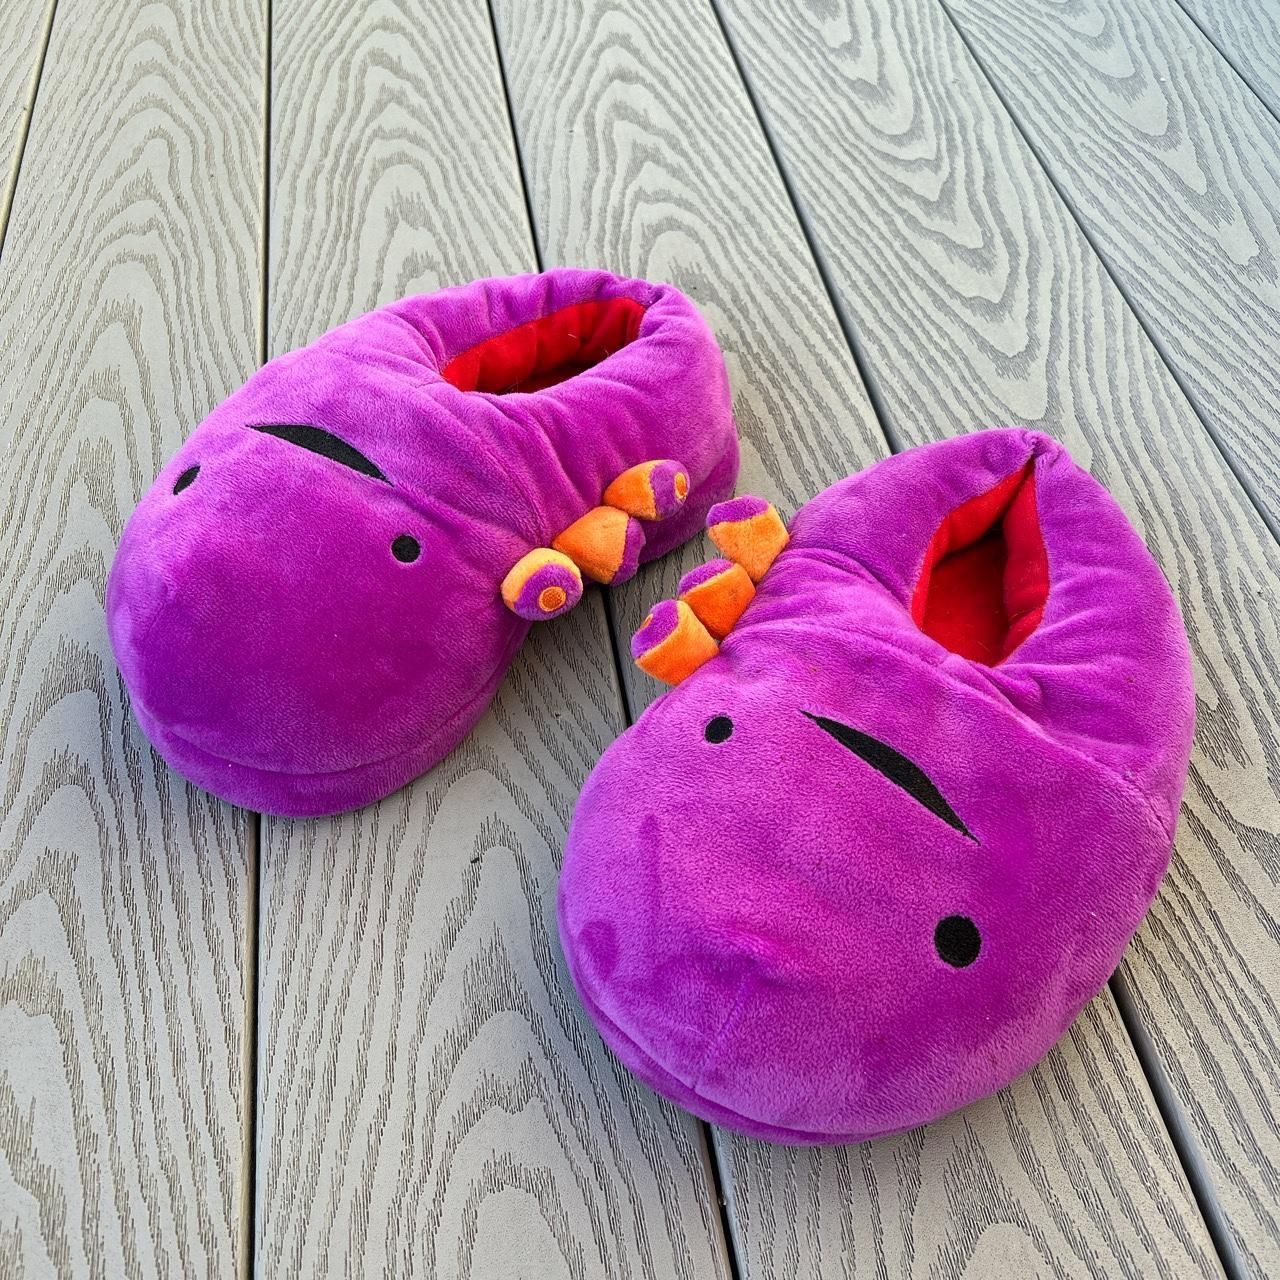 Share more than 153 pink dinosaur slippers best